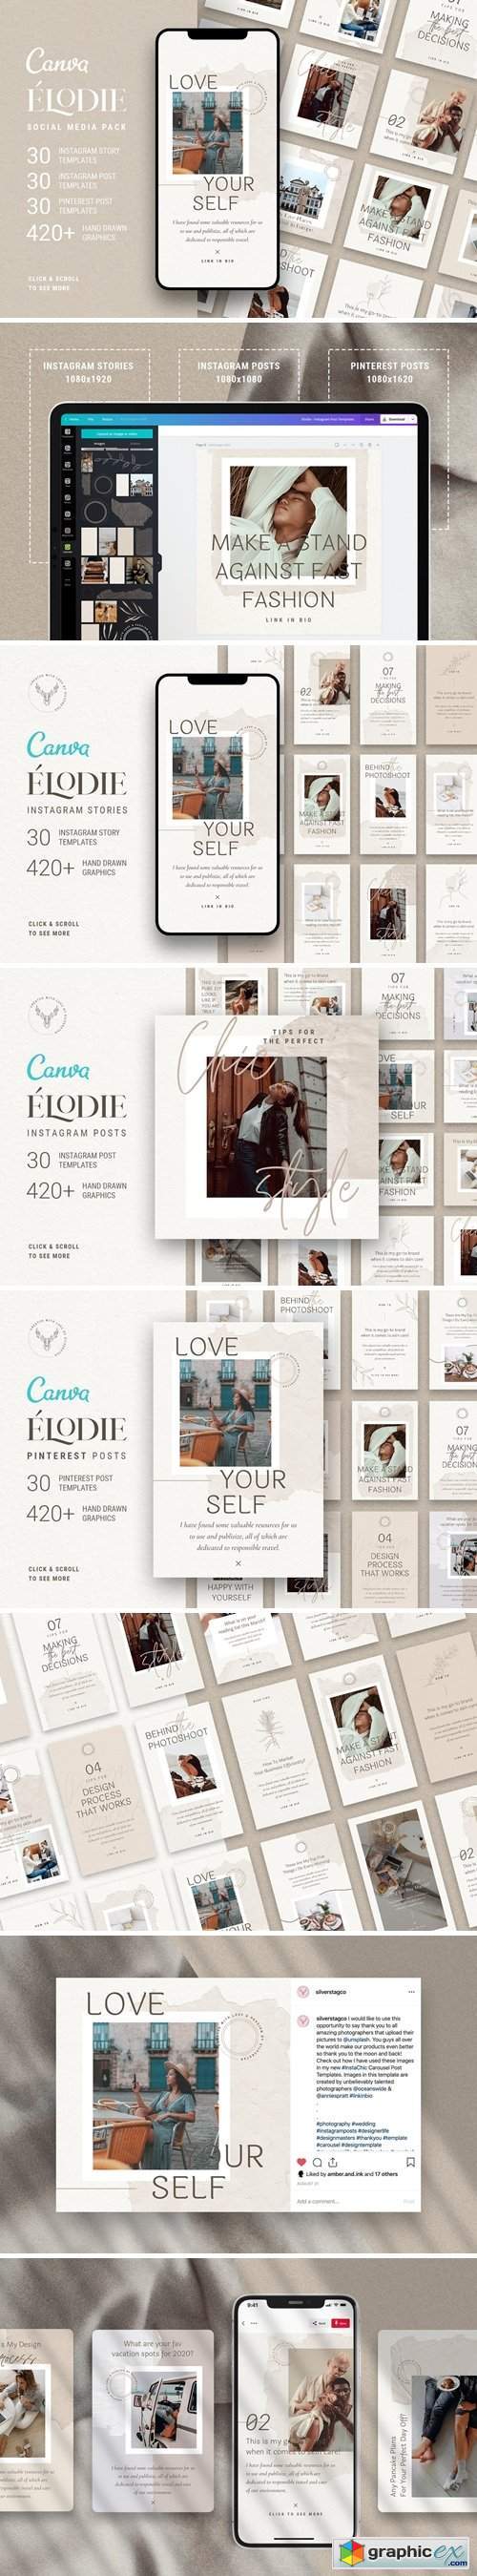 Elodie - Canva Social Templates Pack